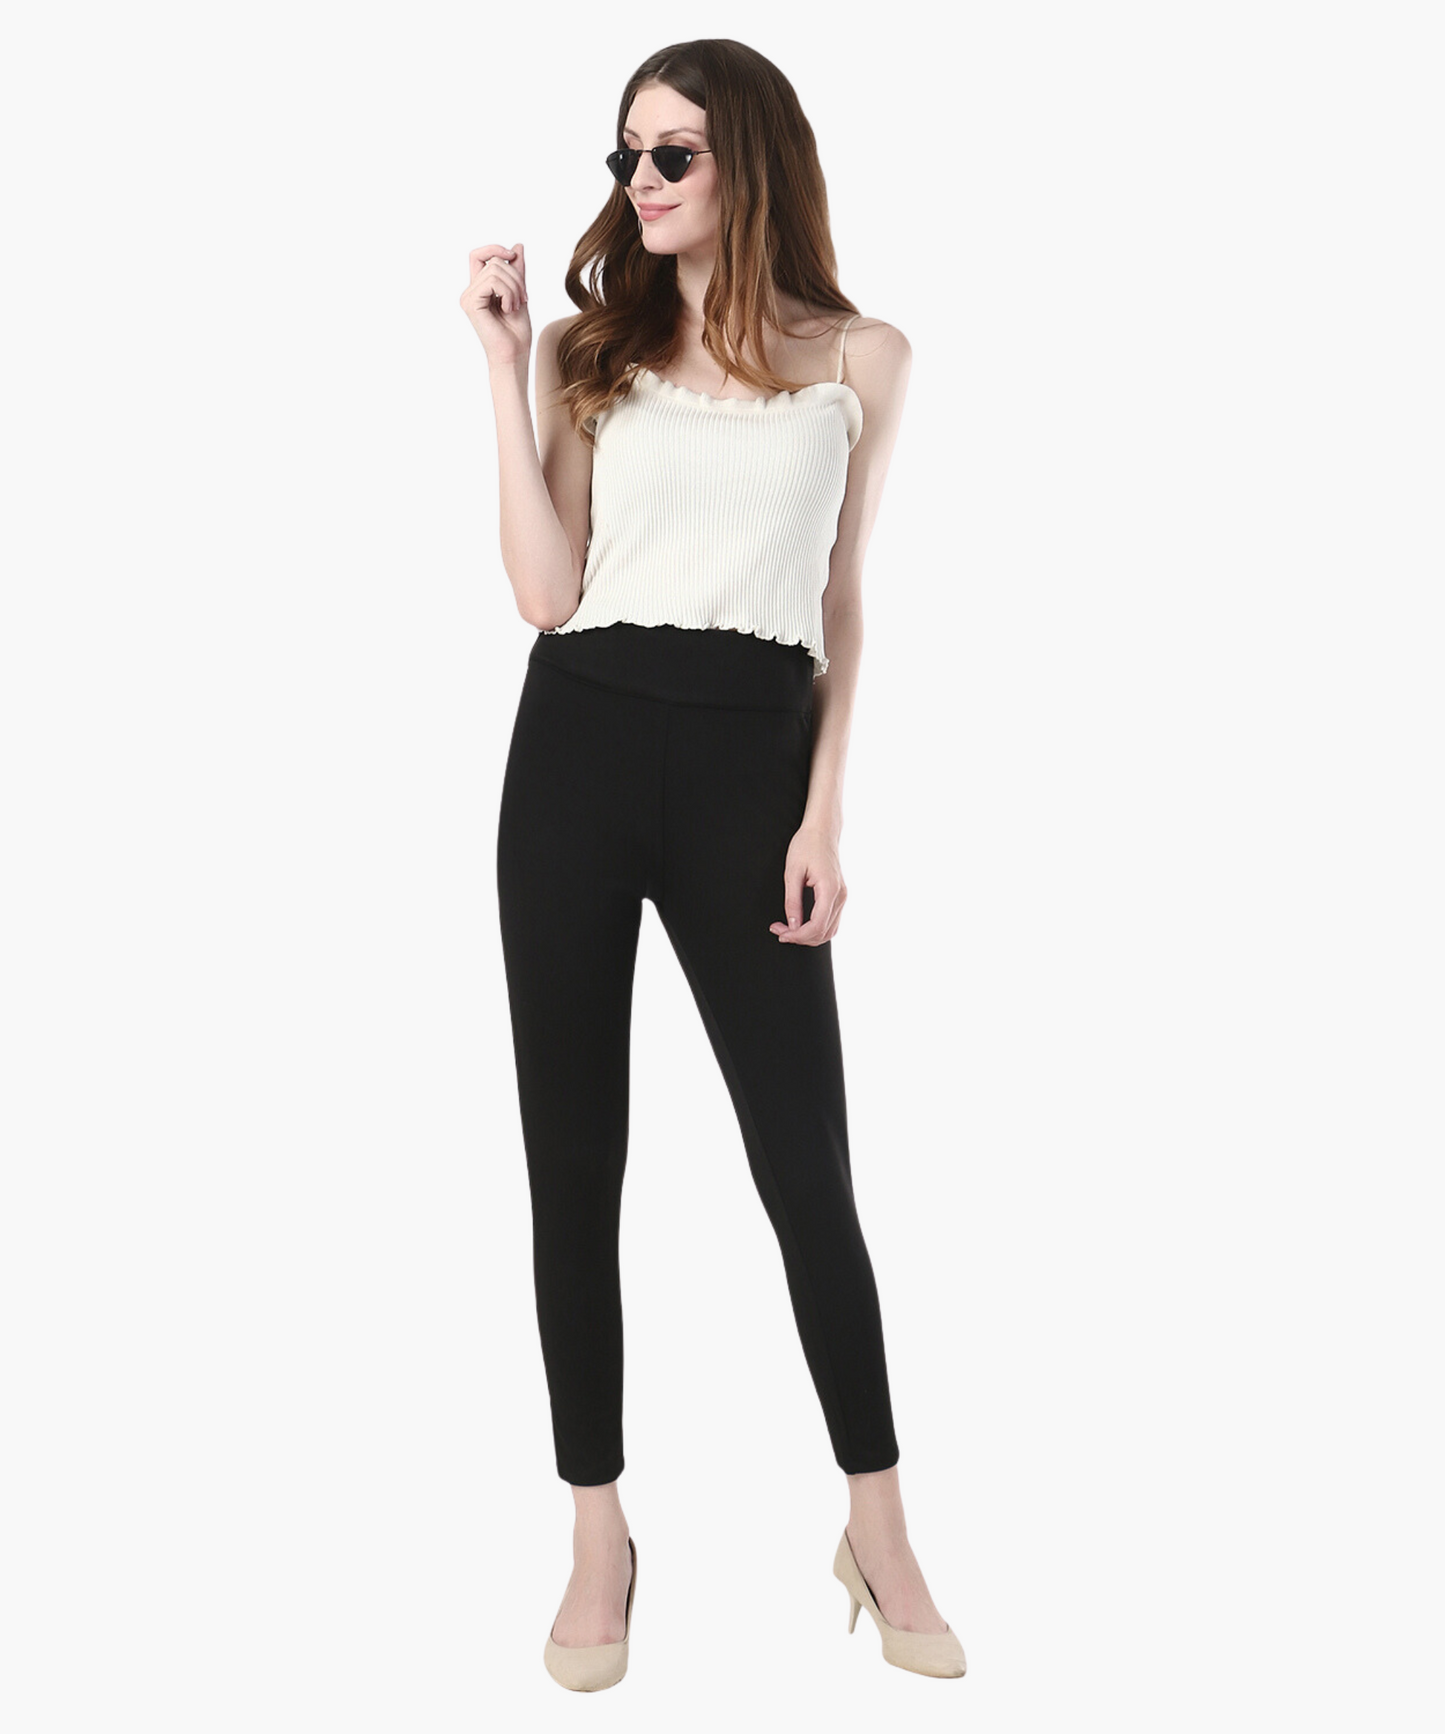 Black High-Waisted Classic Cigarette Trousers for Women -650